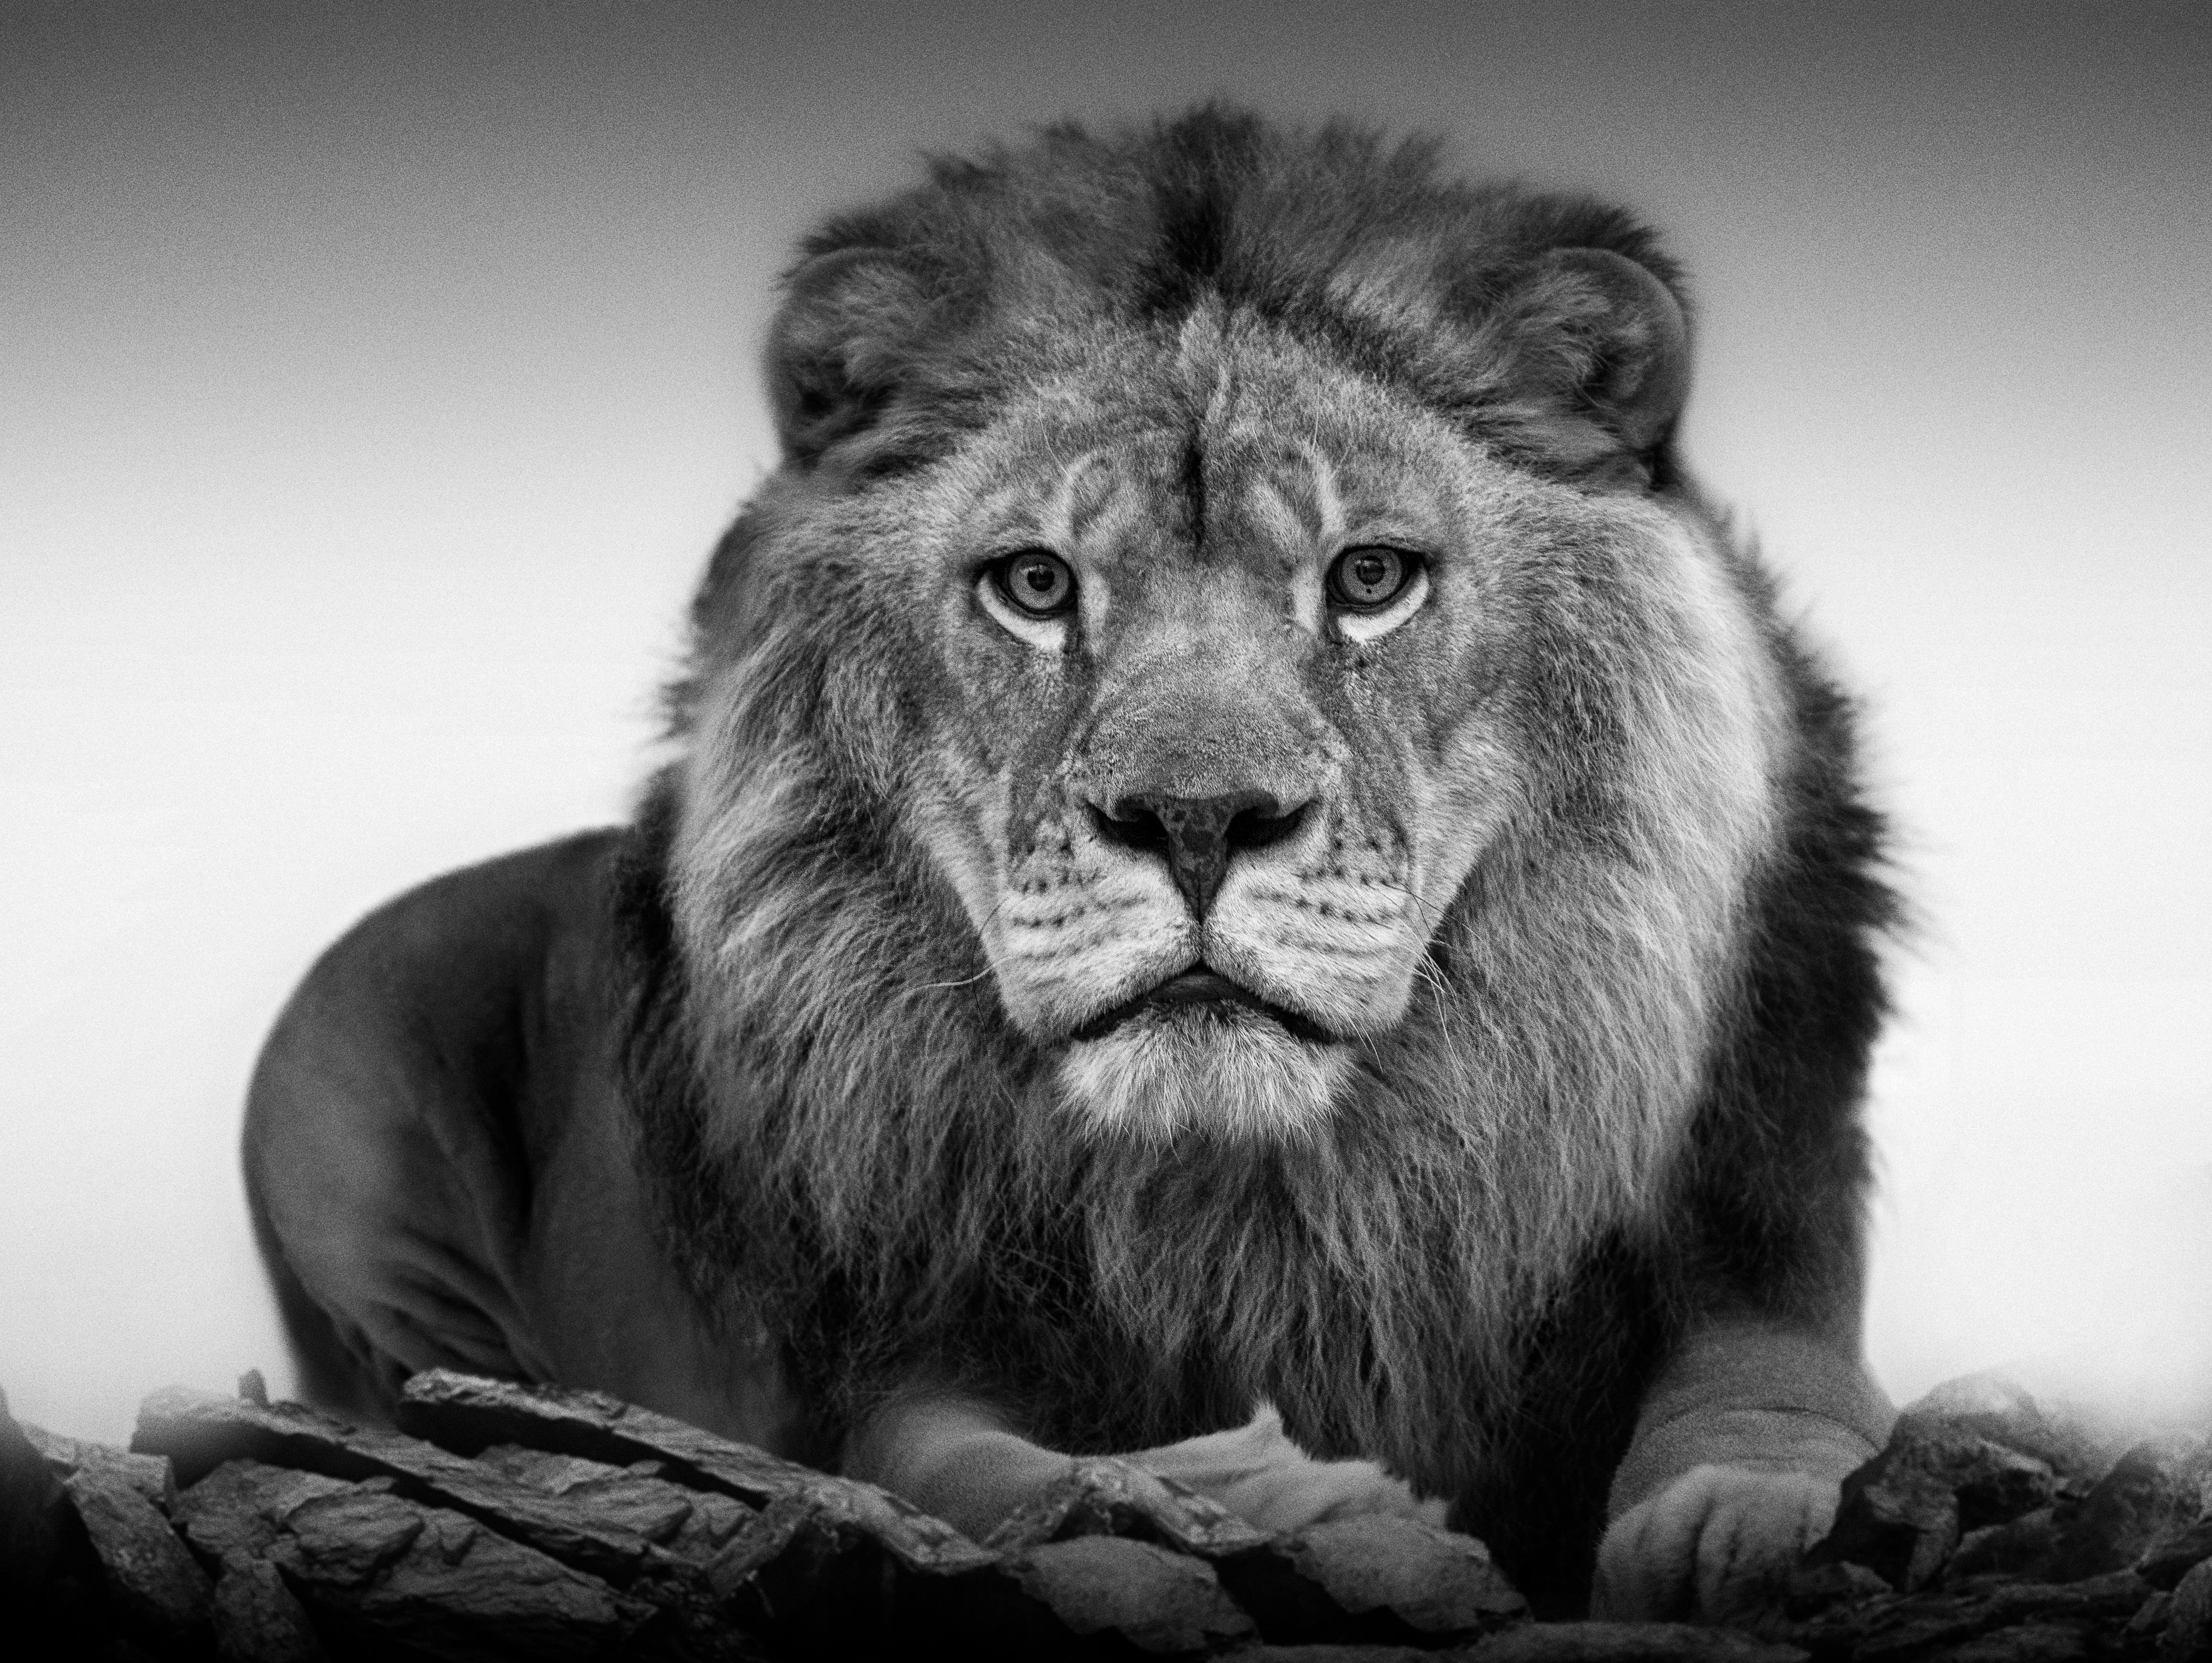 Shane Russeck Black and White Photograph -  Lion Portrait - 40x60 Black & White Photography, Photograph Unsigned Test Print